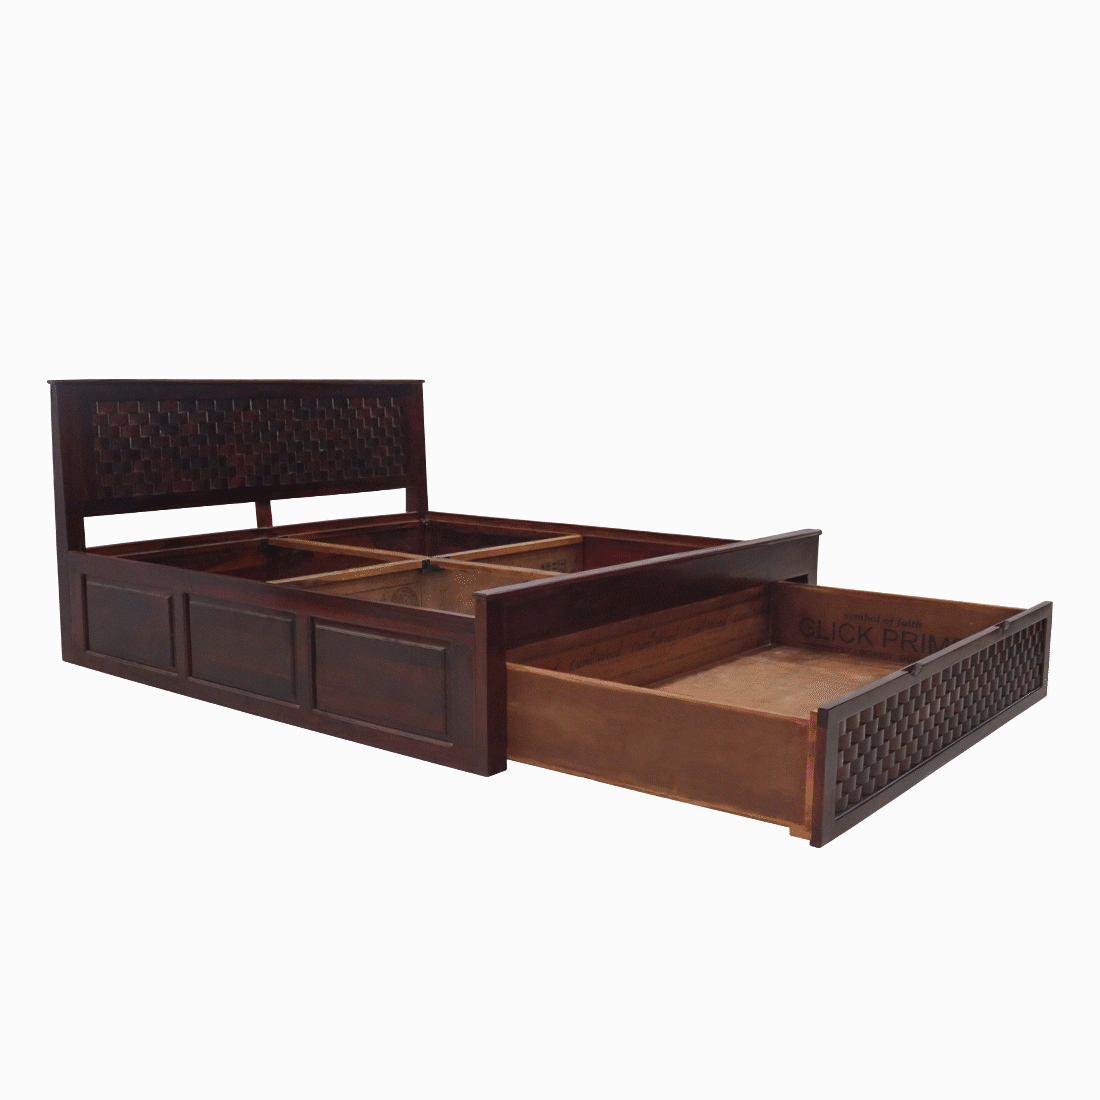 AARAM Furniture House Double Bed with Premium Wooden Quality and Design(Brown)